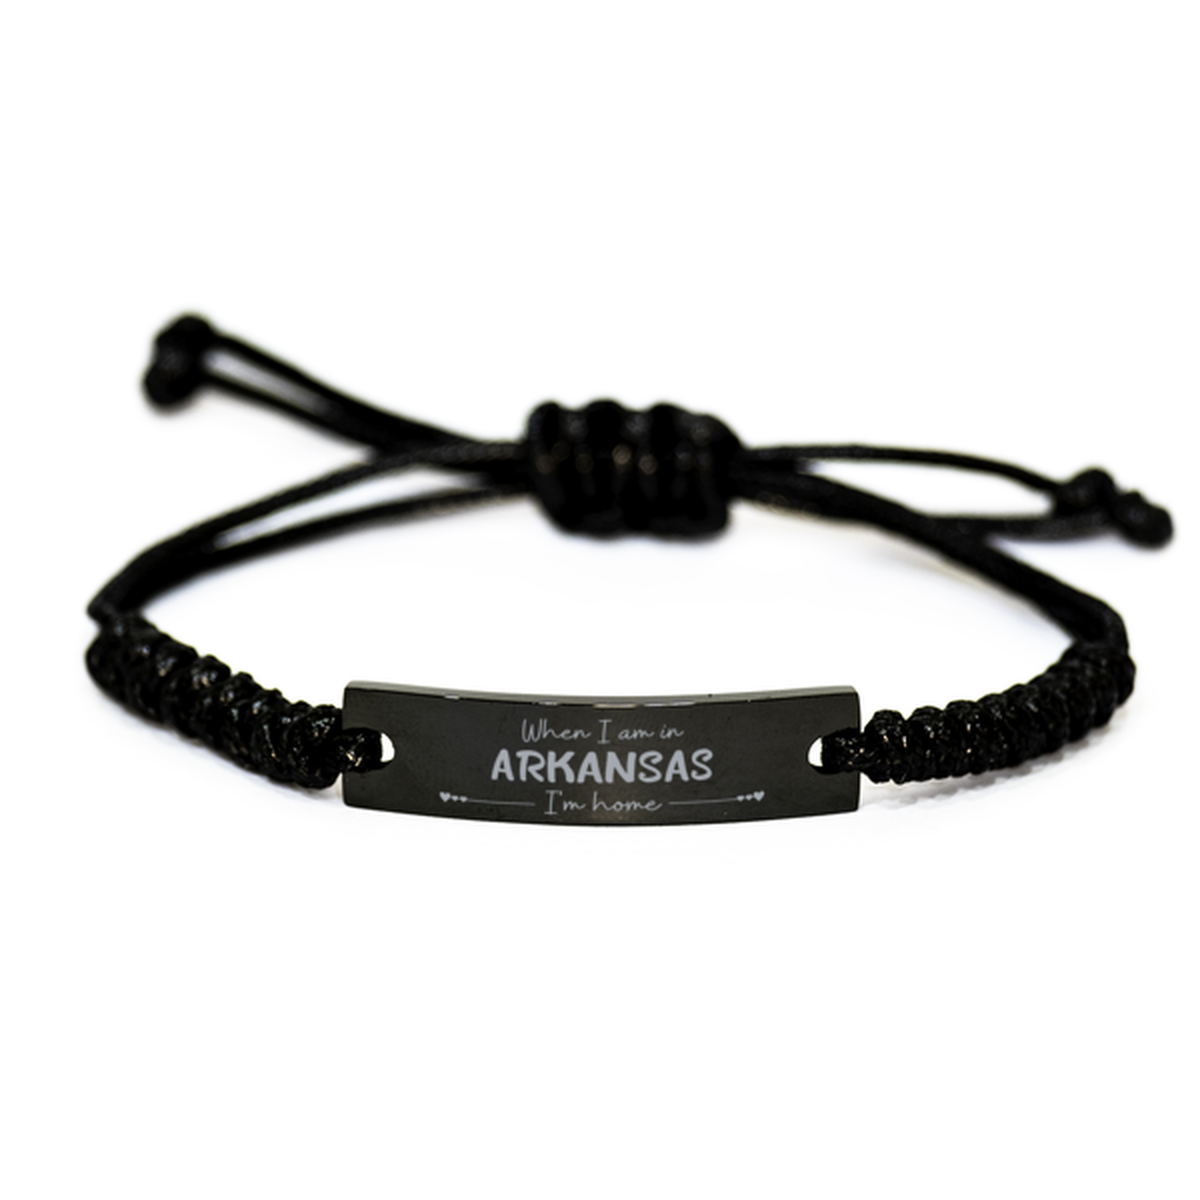 When I am in Arkansas I'm home Black Rope Bracelet, Cheap Gifts For Arkansas, State Arkansas Birthday Gifts for Friends Coworker